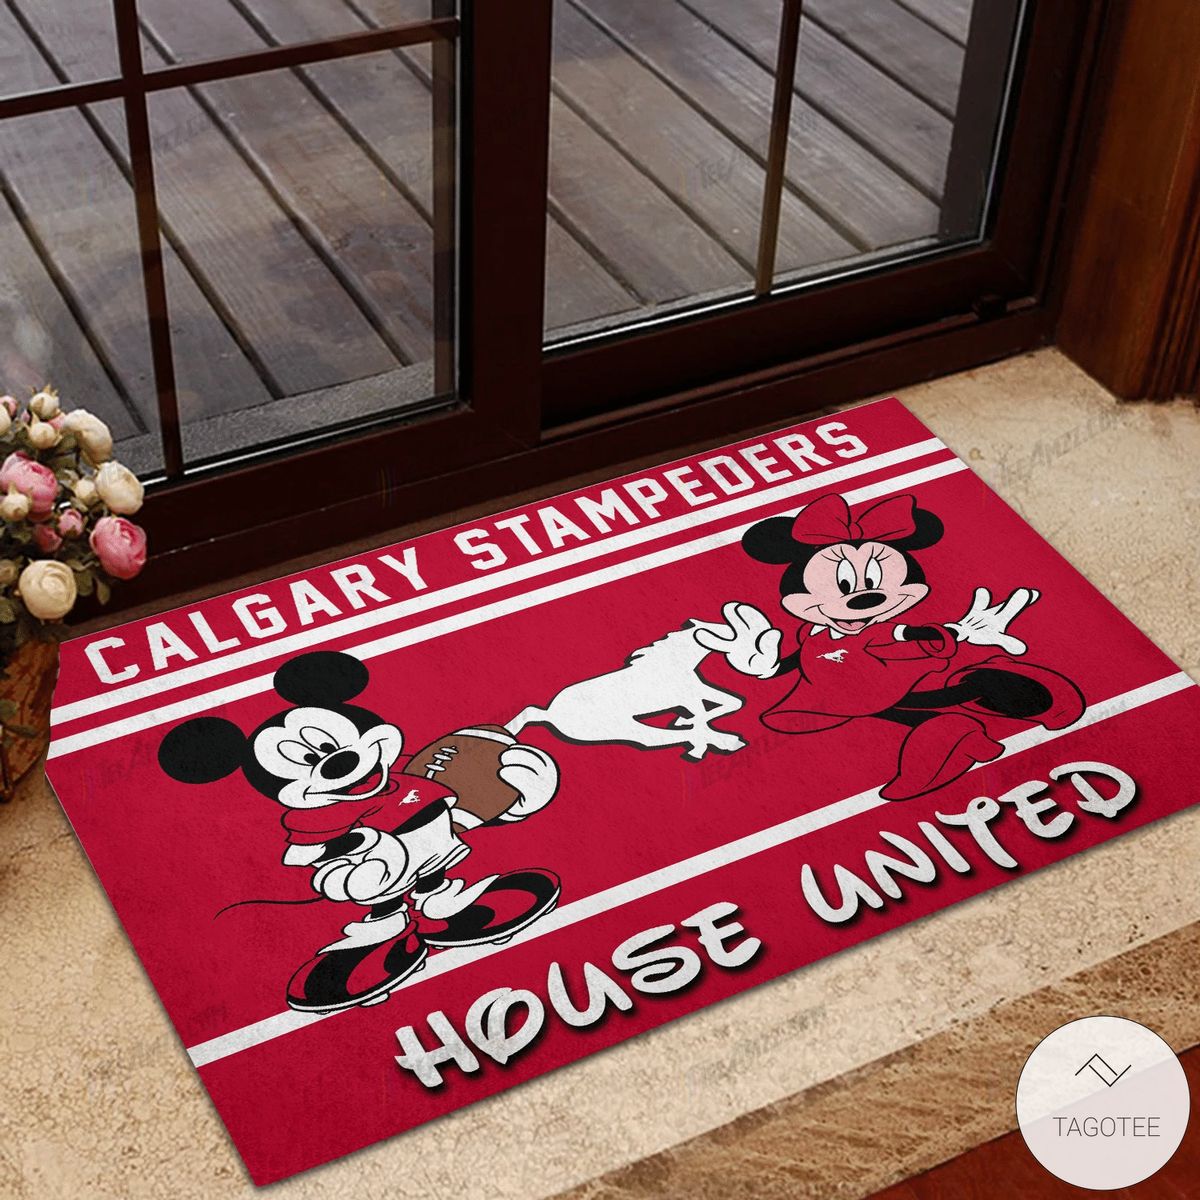 Calgary Stampeders House United Mickey Mouse And Minnie Mouse Doormat